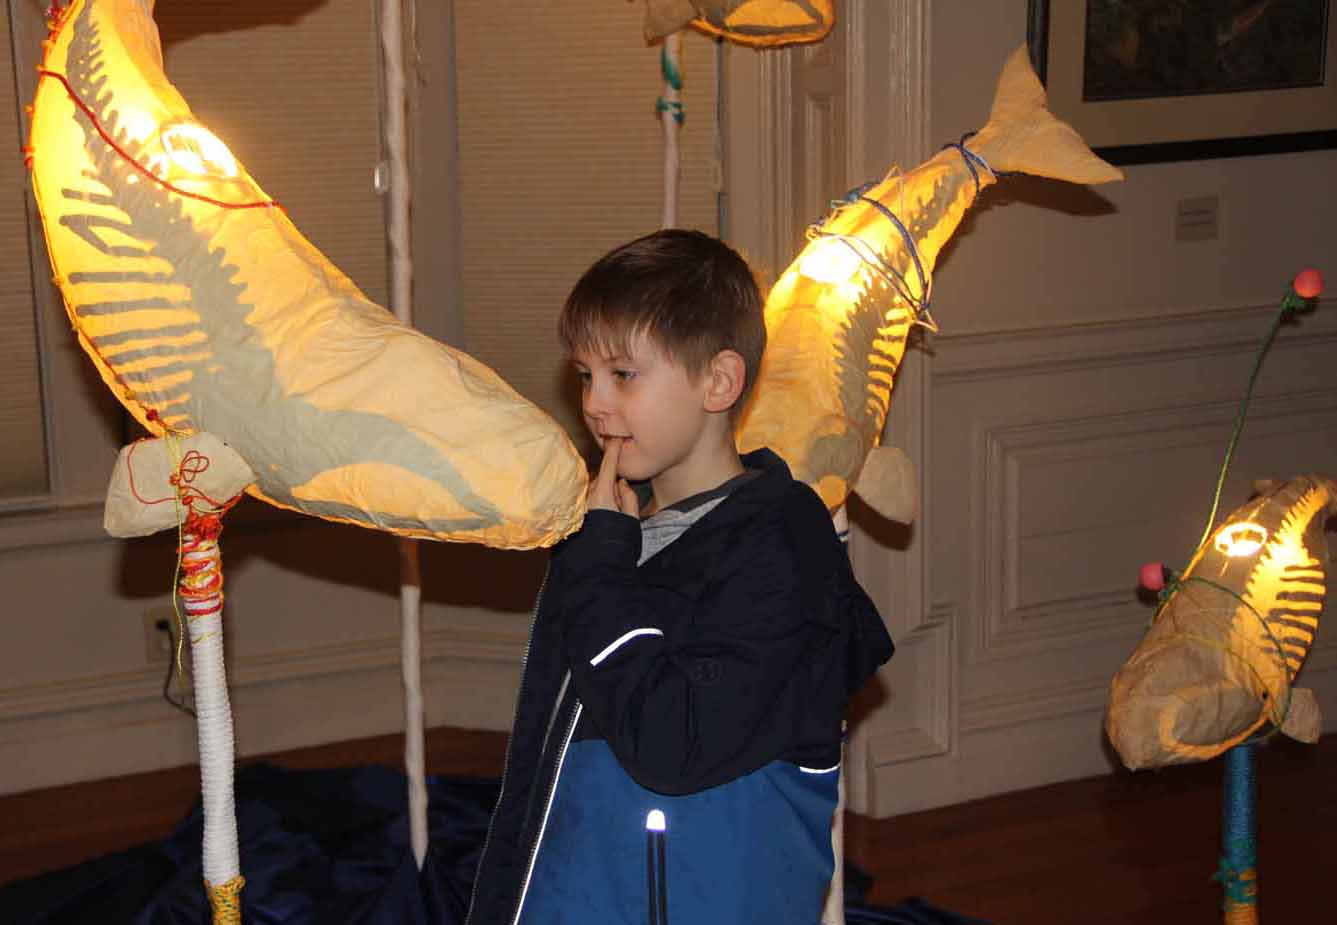 Chancellor Talbot, 8, of East Lyme, looks at one of the "Ghost Whales" created by Kristian Brevik that is part of the "Crosscurrents" exhibit of CT Sea Grant Arts Support Awards program during the opening on Jan. 24.